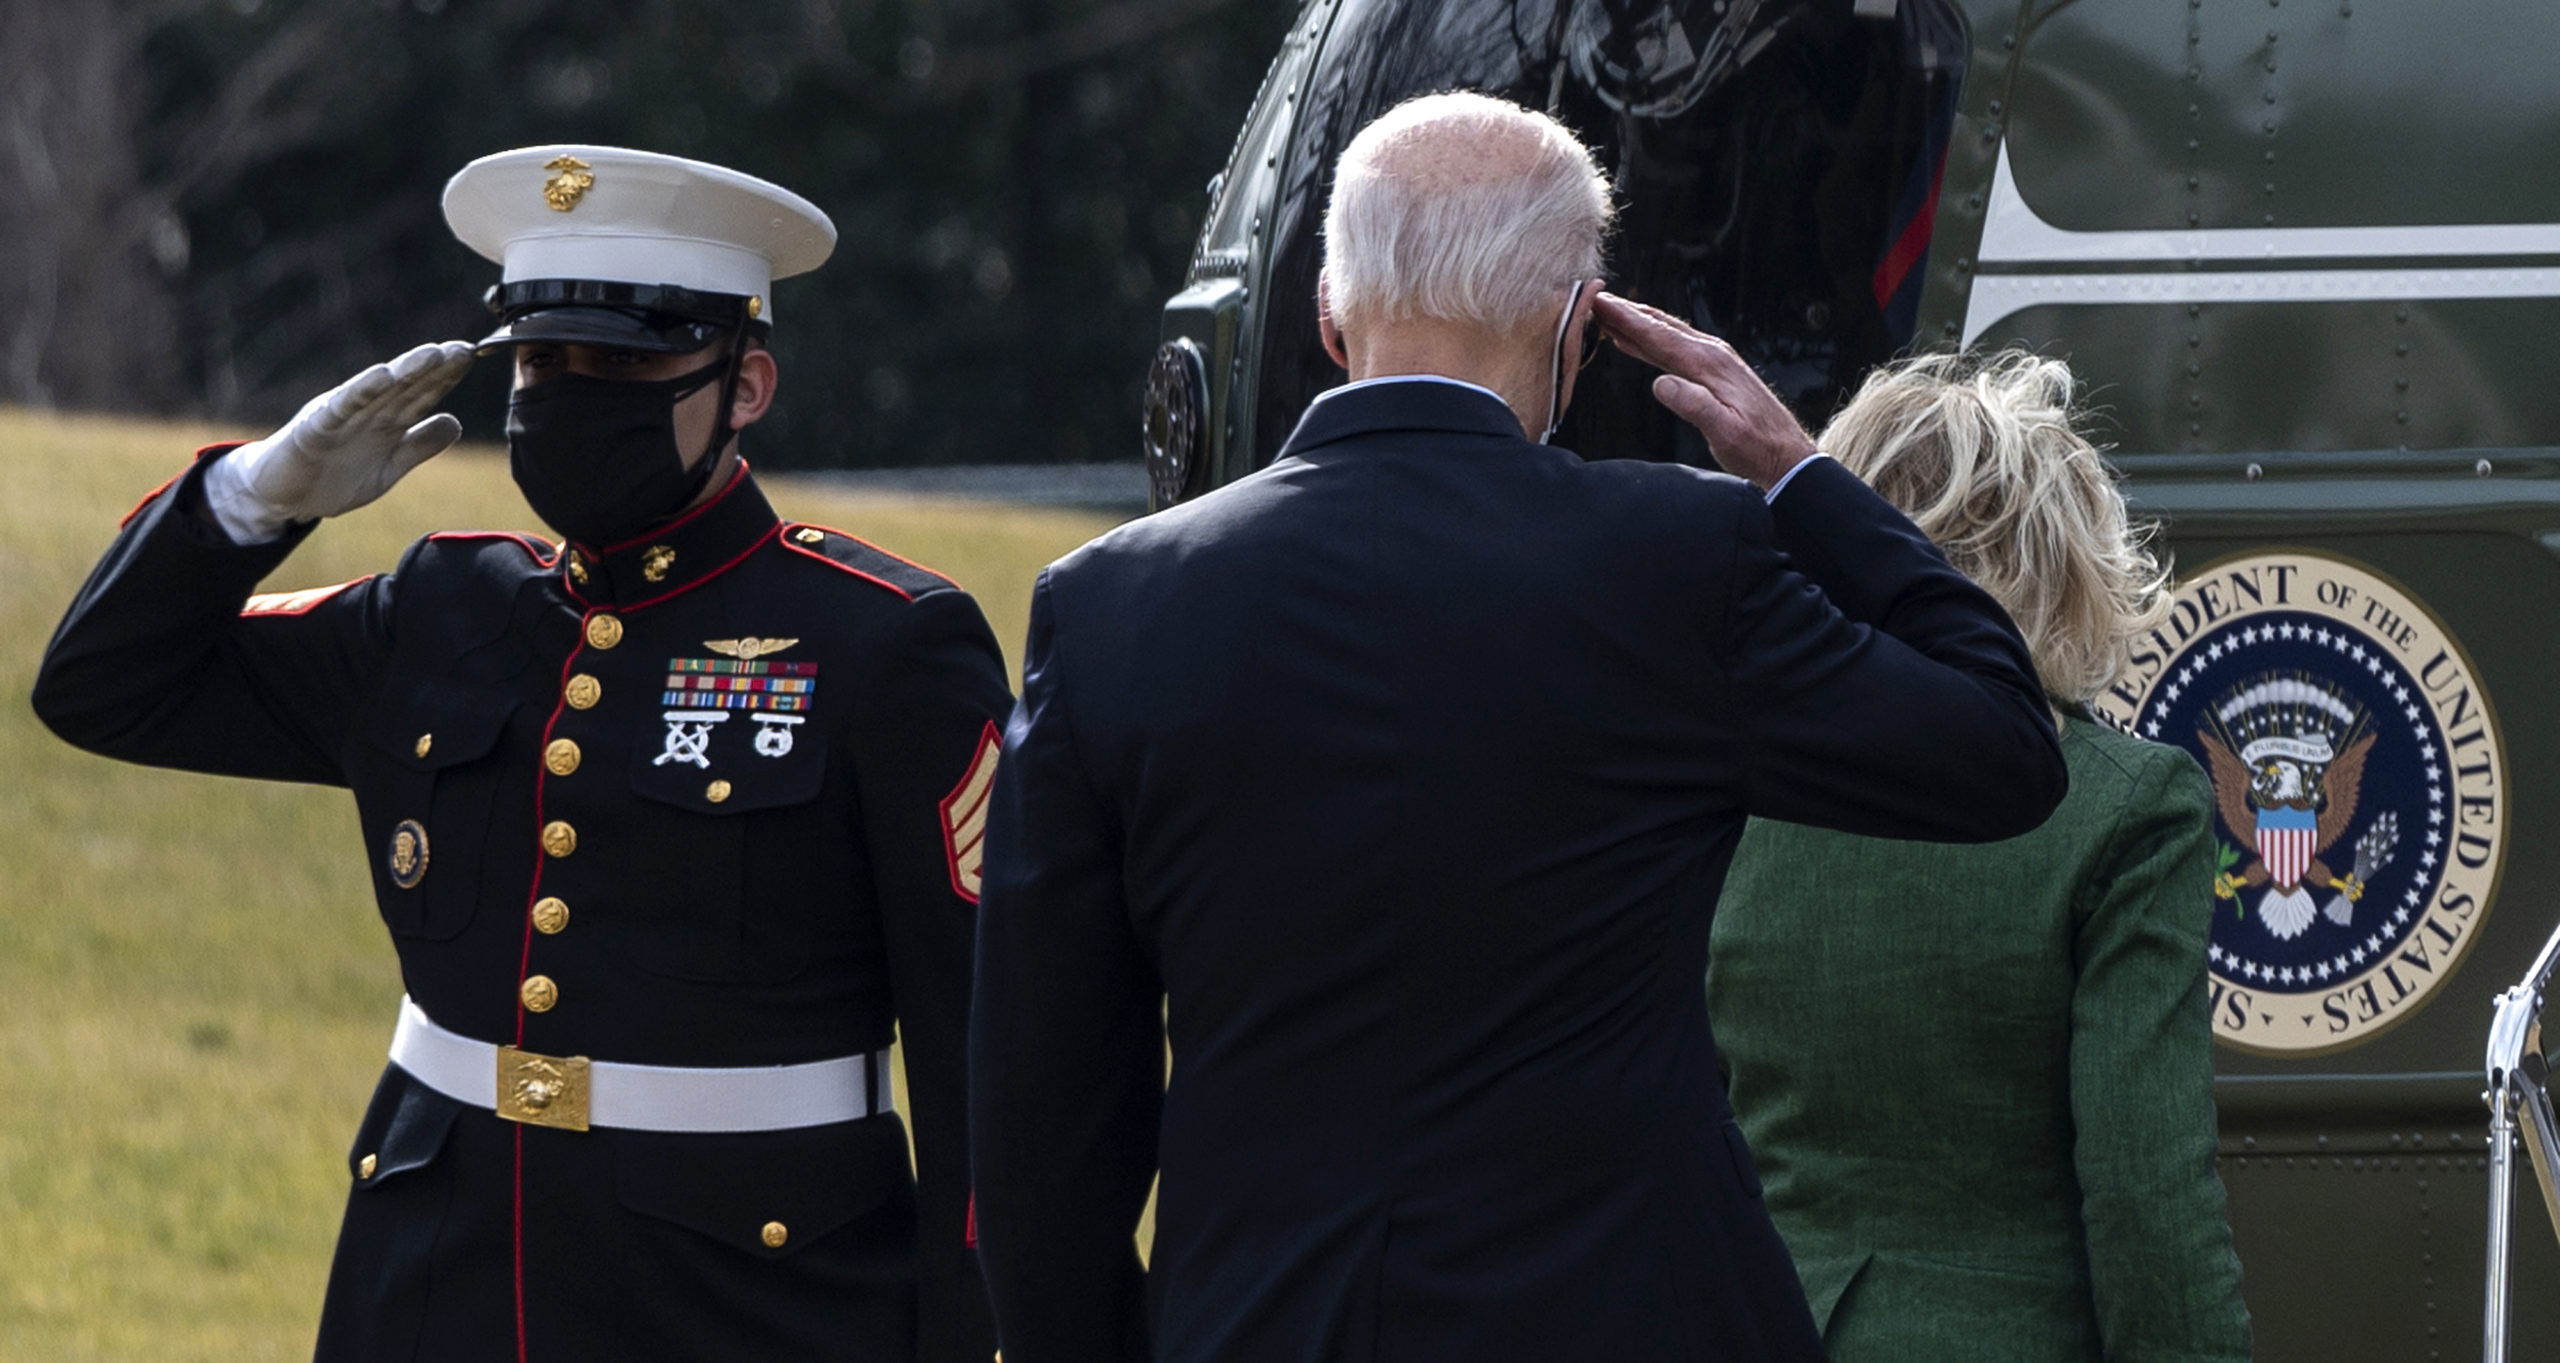 US President Joe Biden and First Lady Jill Biden walk to Marine One as they depart from the South Lawn of the White House in Washington, DC on February 26, 2021. - President Biden and First Lady travel to Texas to visit a food bank and emergency operations center after a winter storm left millions without electricity and clean water for days (Photo by ANDREW CABALLERO-REYNOLDS/AFP via Getty Images)